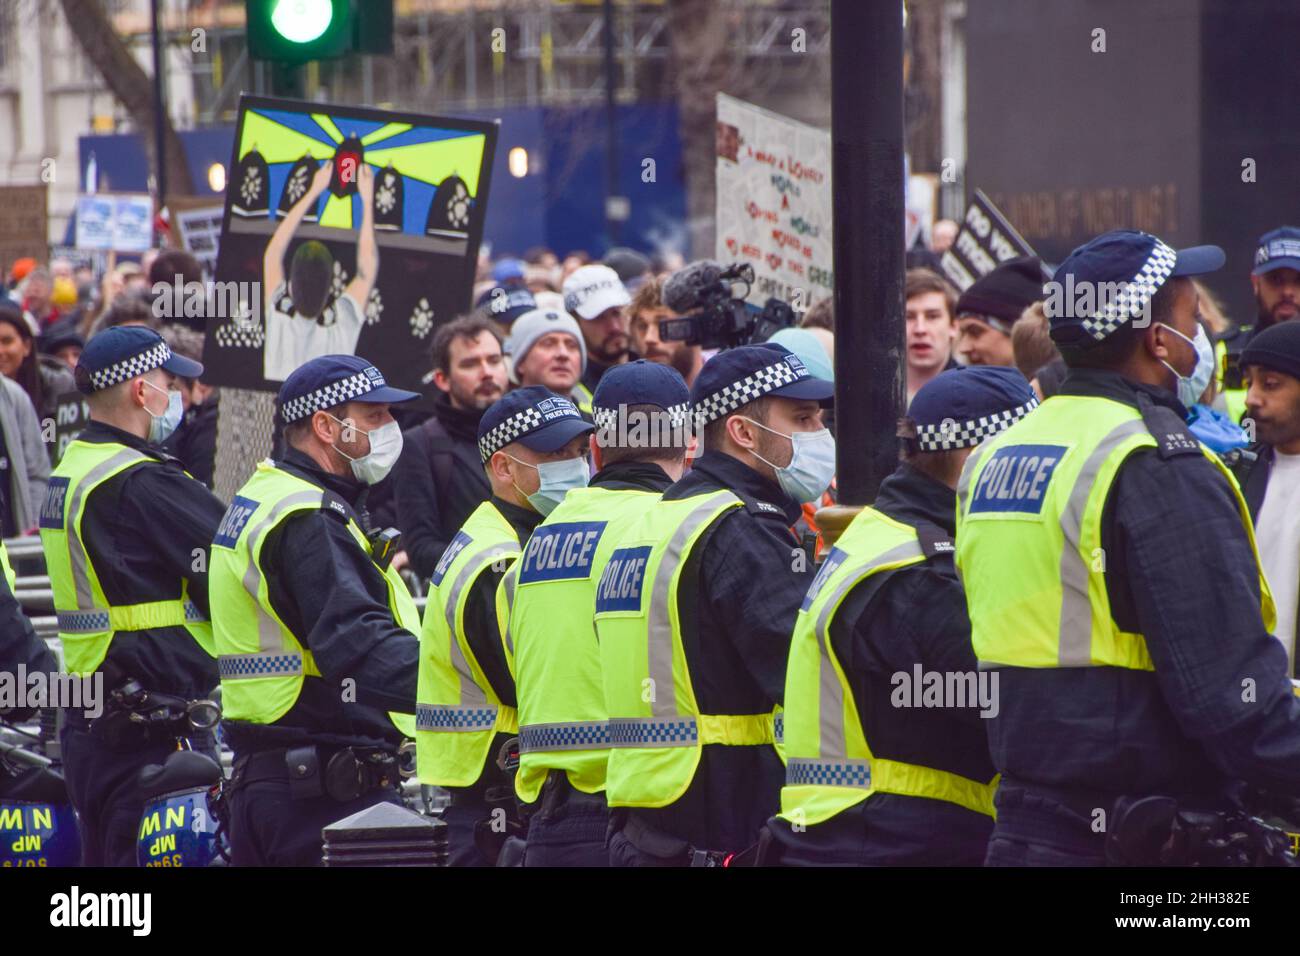 London, UK 22nd January 2022. Police officers guard Downing Street during the protest. Thousands of people marched through Central London in protest against mandatory vaccines for NHS staff, face masks, covid vaccines, vaccination passports and various other grievances fuelled by conspiracy theories. Stock Photo